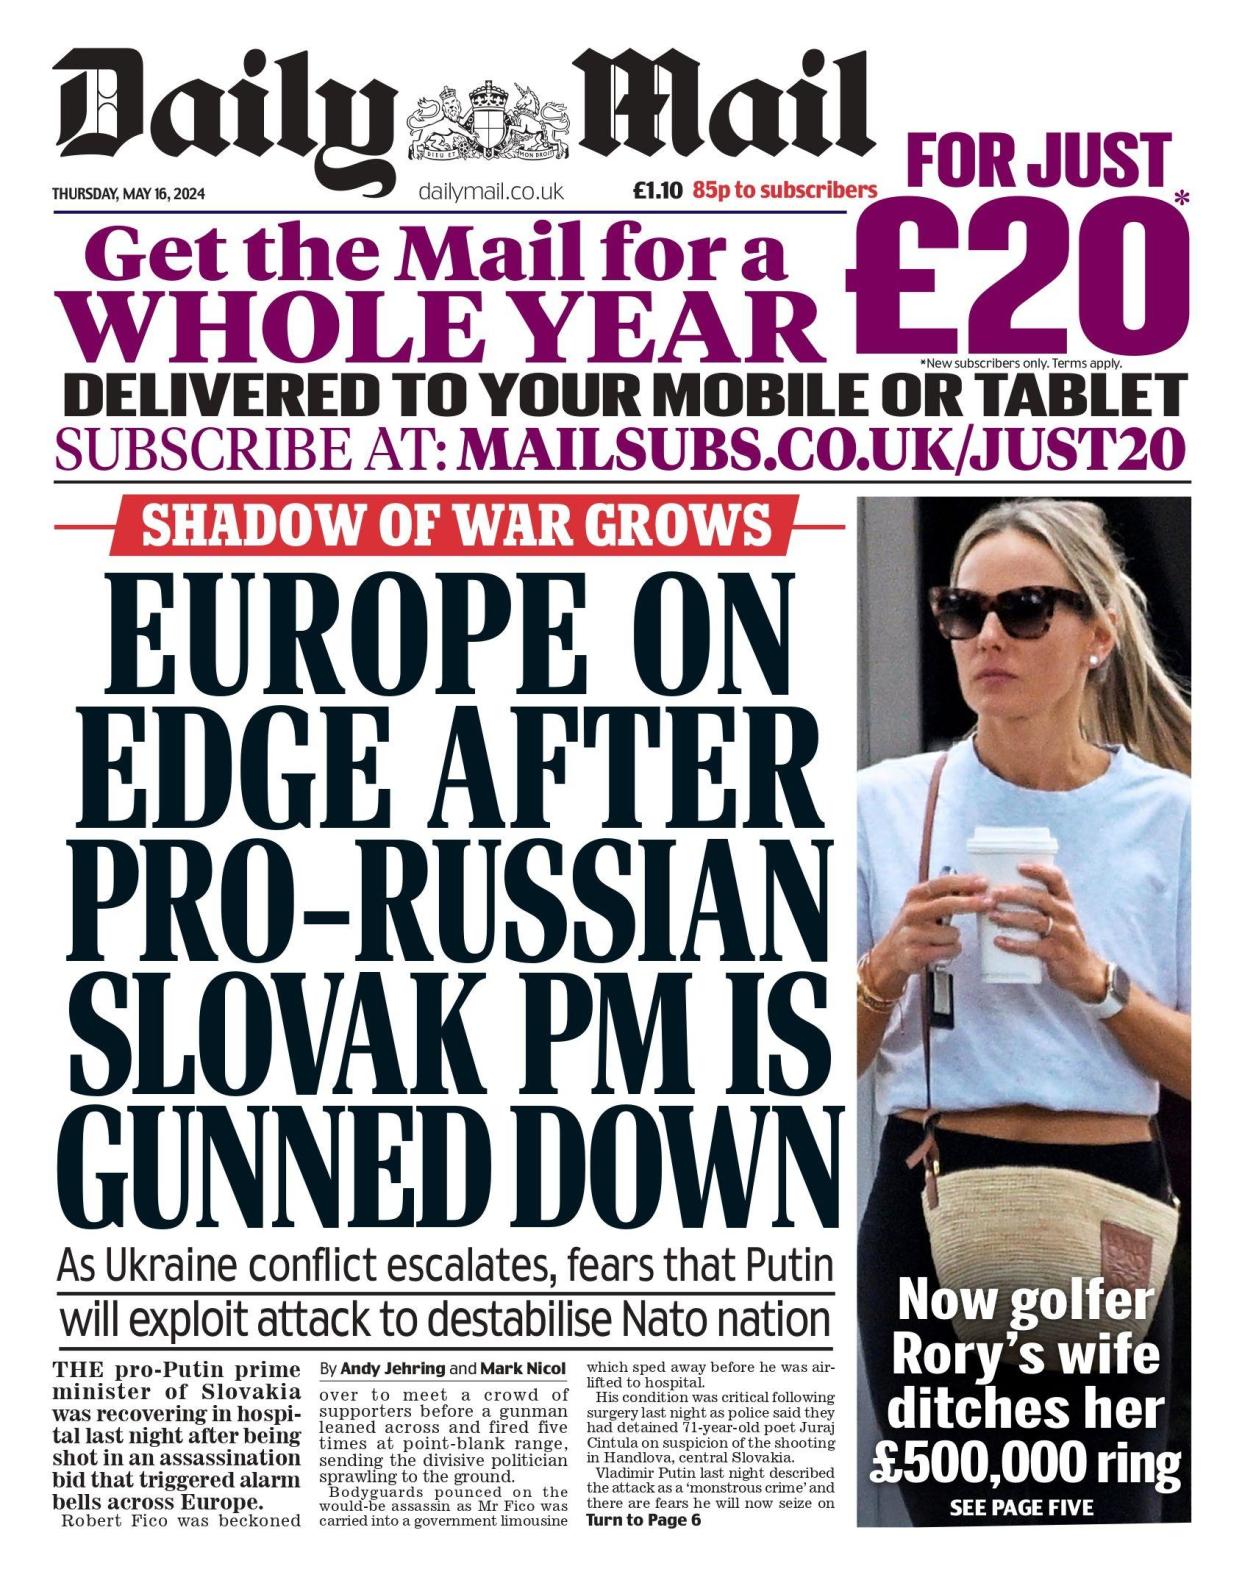 Daily Mail: Europe on the edge as assassination attempt on pro-Putin Slovakian PM is branded 'a wake-up call to the West': Fears grow Russian President will exploit the attack - as badly wounded man's deputy insists he will survive gun attack